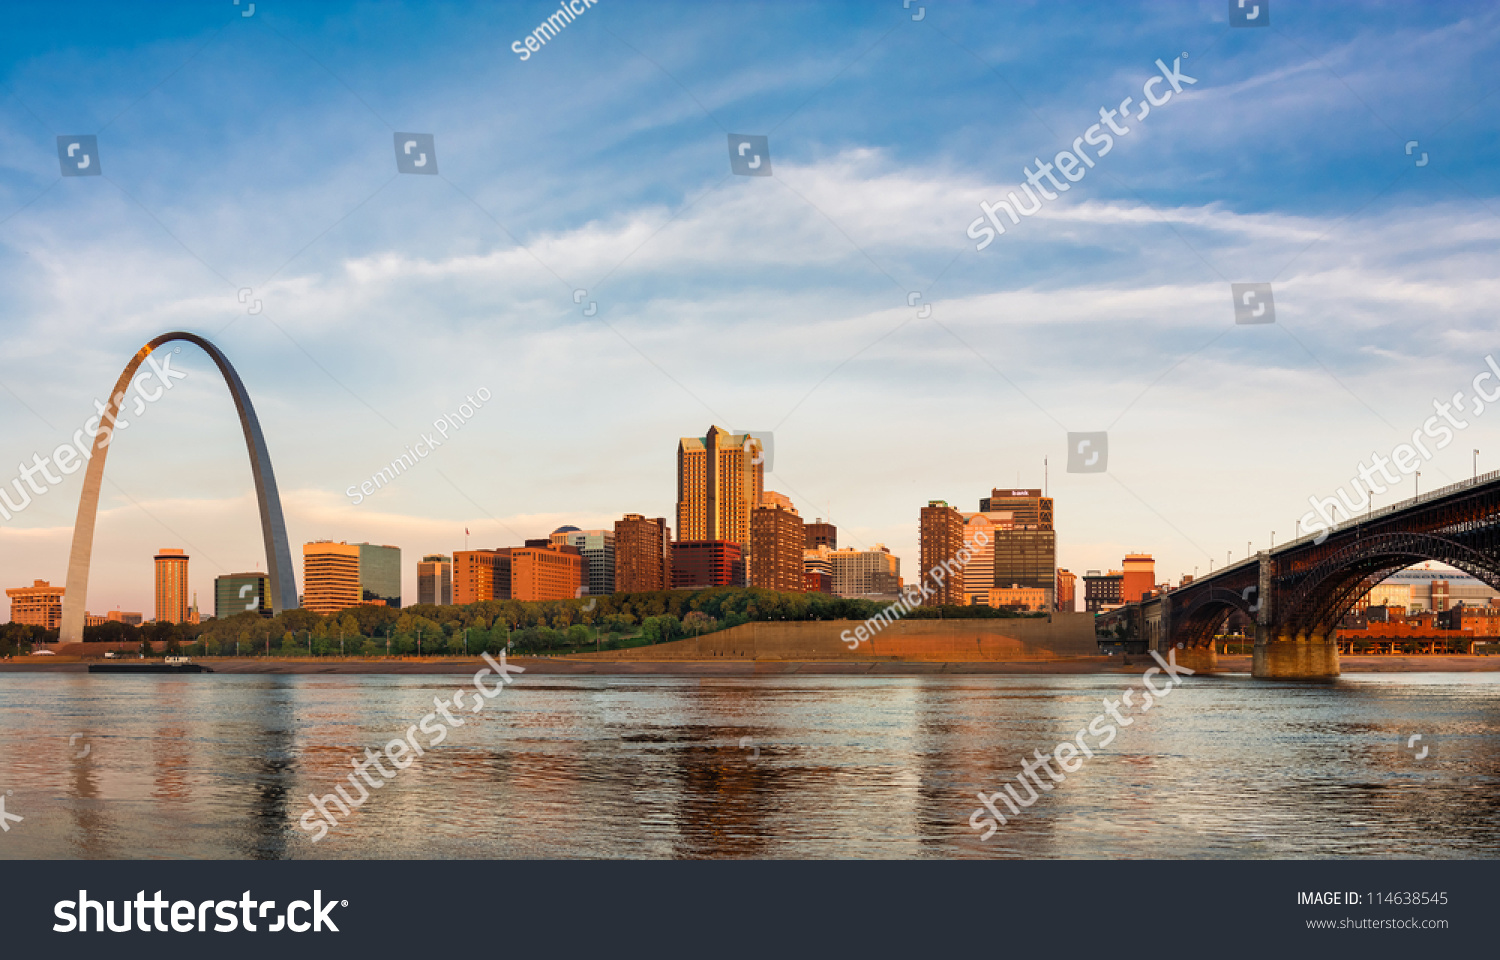 Panoramic view of St Louis with The Gateway Arch and Eads Bridge #114638545